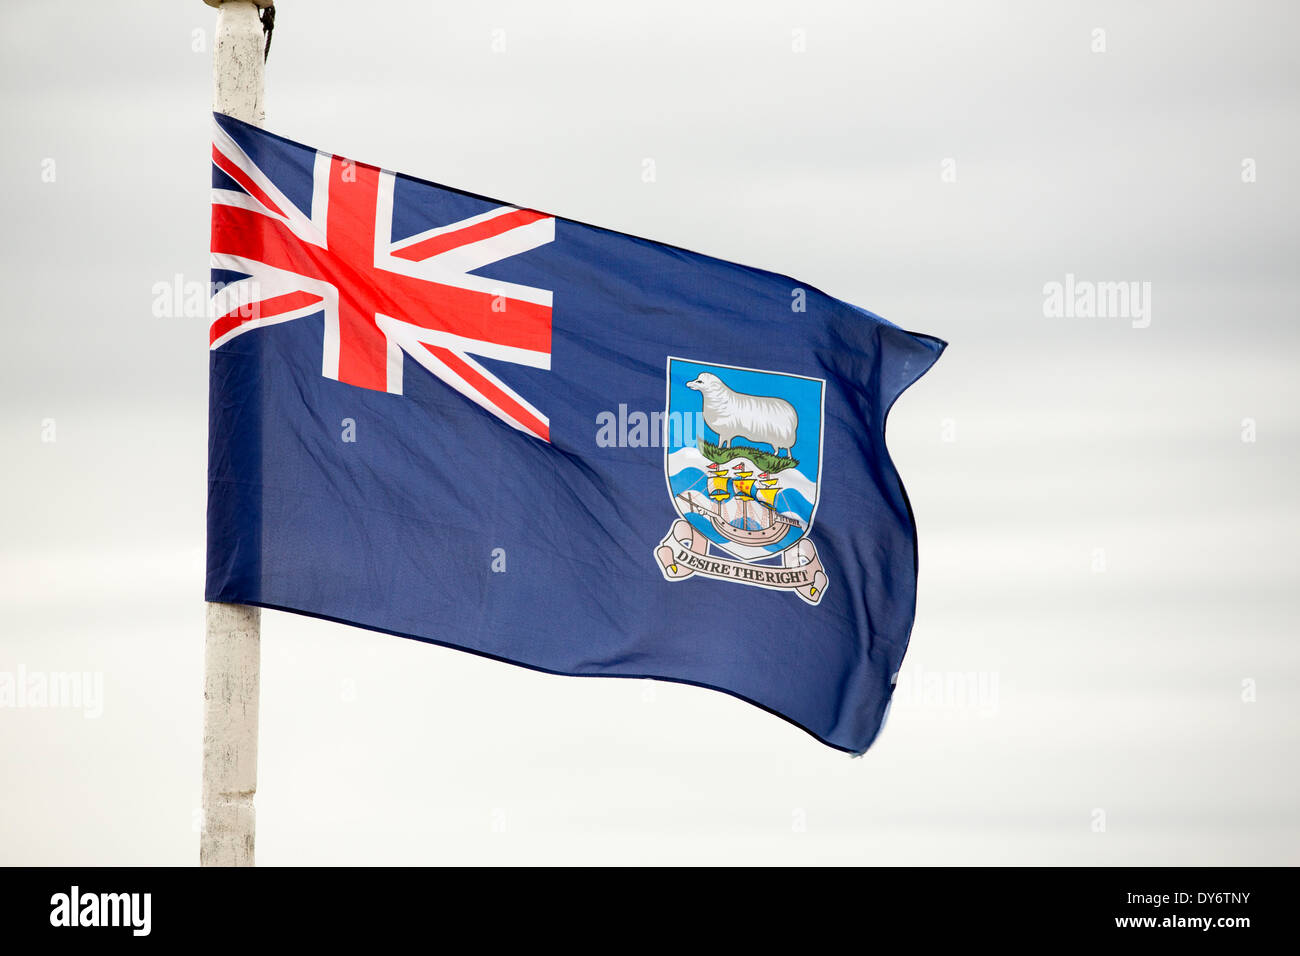 A Falklands flag on Westpoint island in the Falkland islands off Argentina, South America. Stock Photo